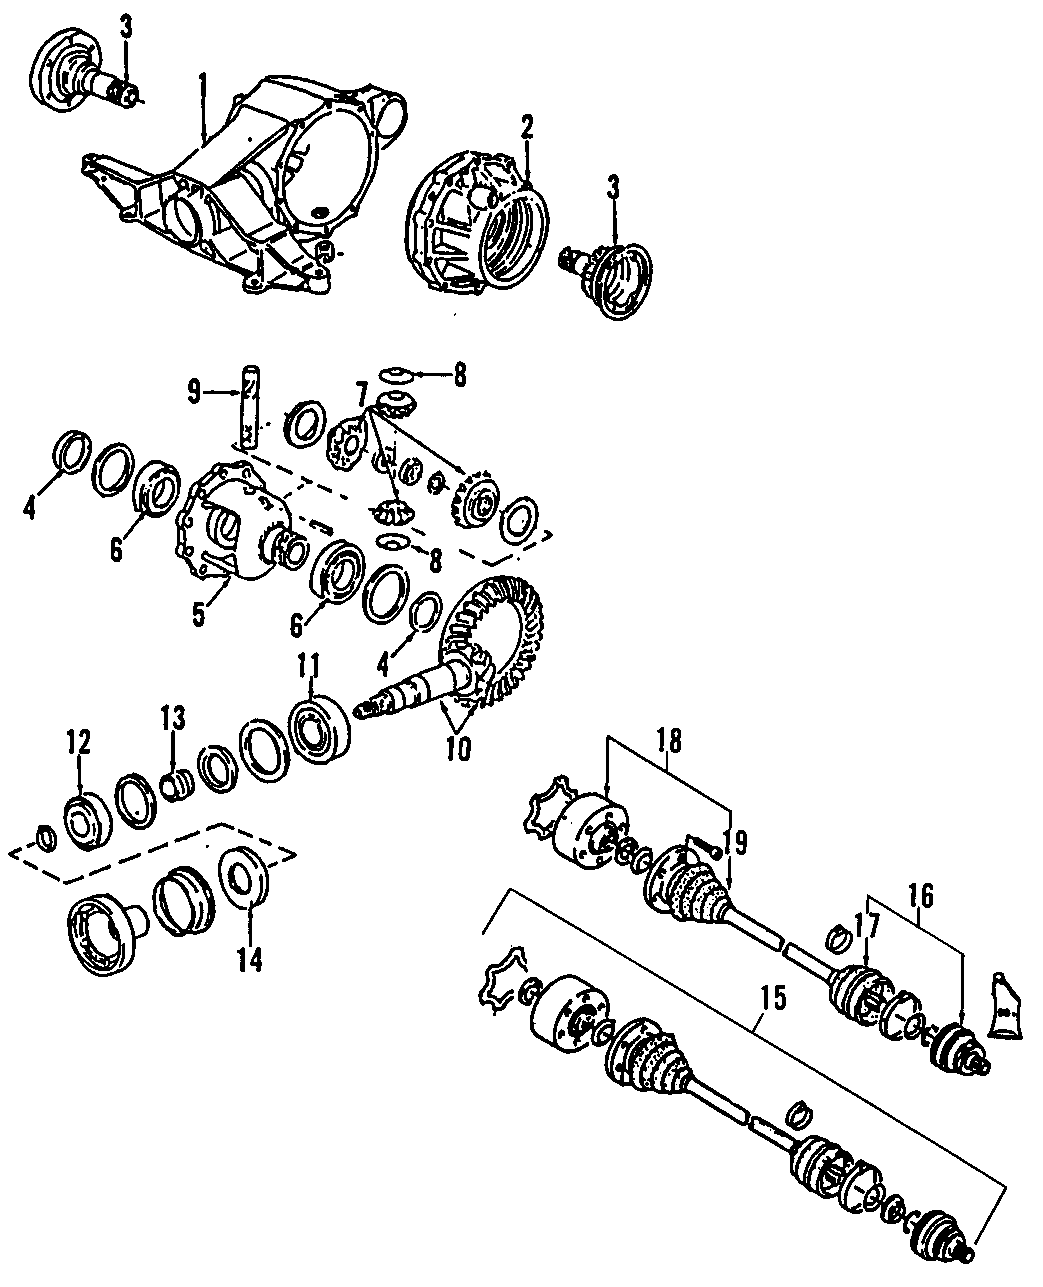 8DRIVE AXLES. REAR AXLE. AXLE SHAFTS & JOINTS. DIFFERENTIAL. PROPELLER SHAFT.https://images.simplepart.com/images/parts/motor/fullsize/E255240.png